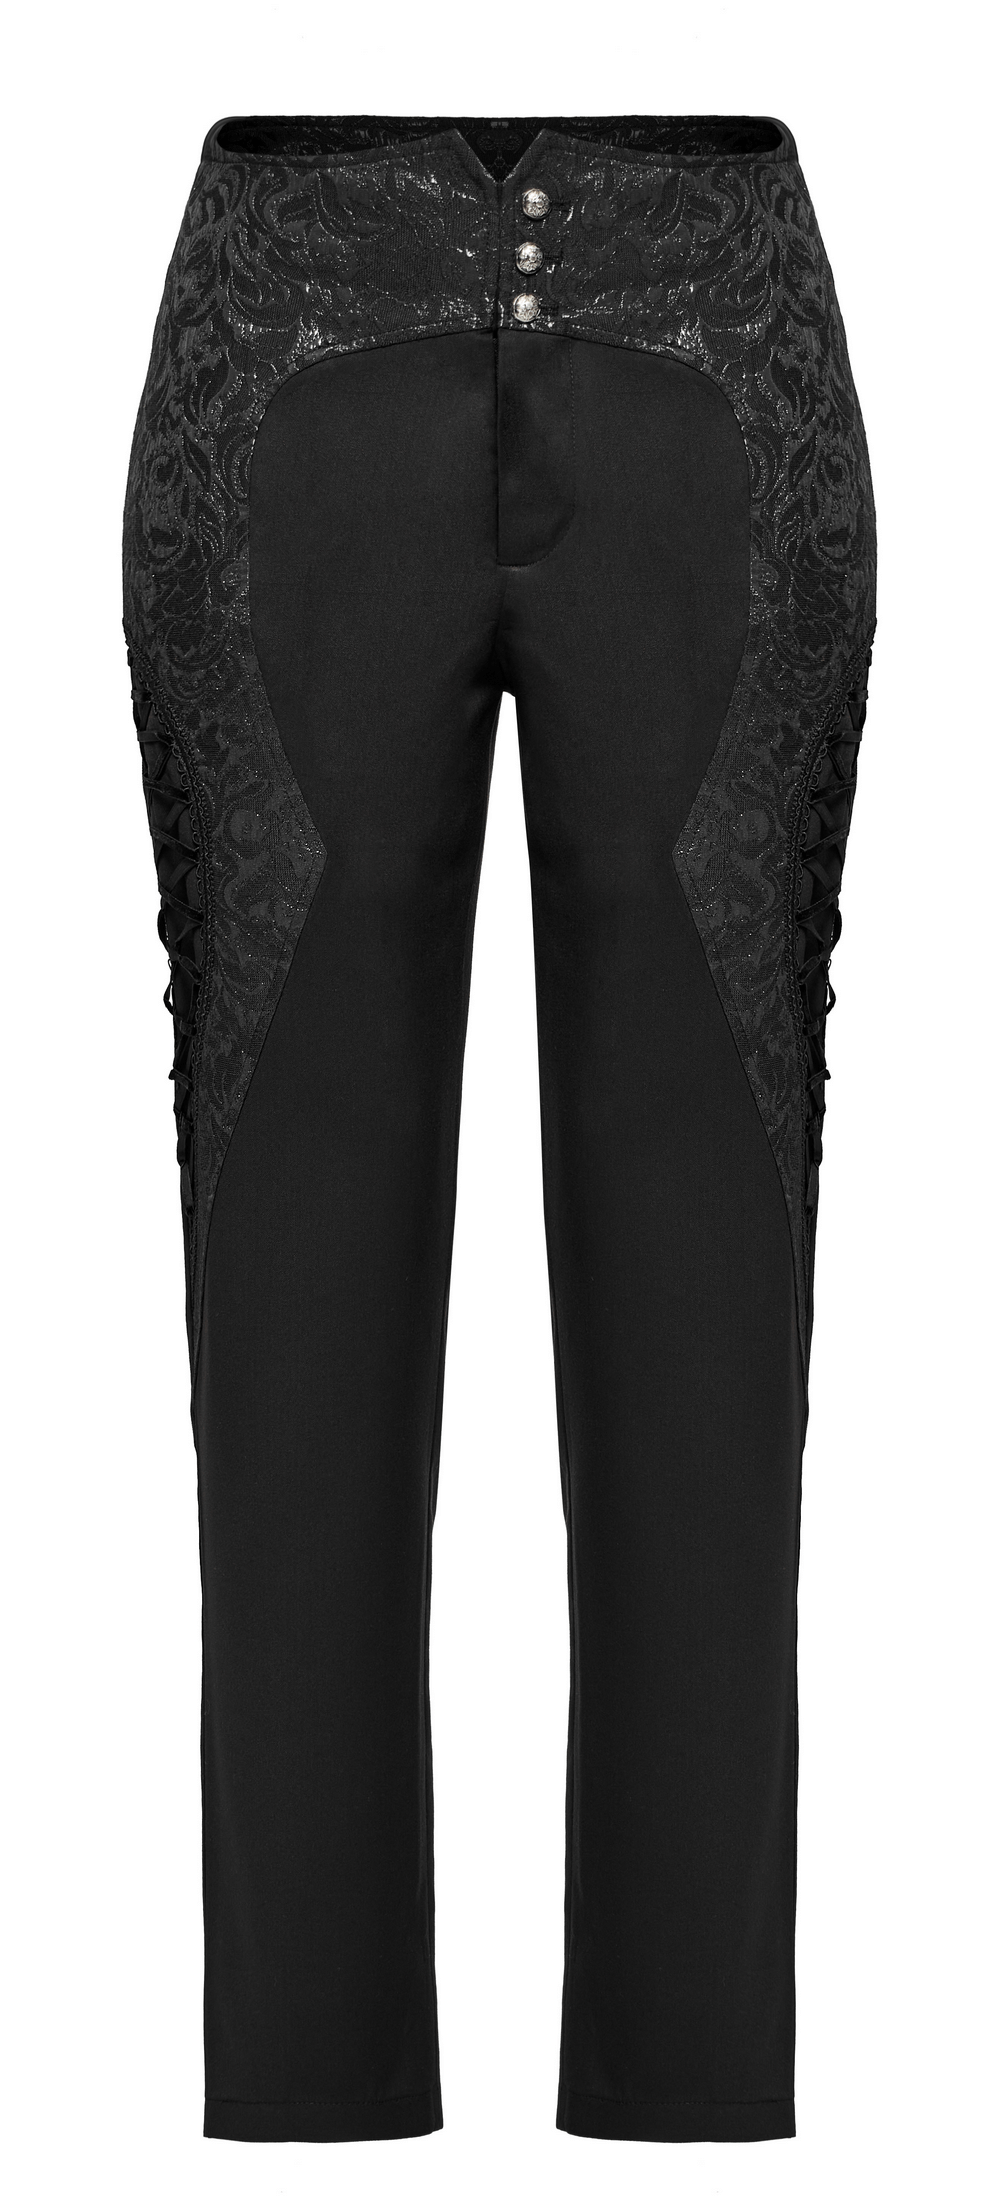 Laced Gothic Black Pants with Jacquard Detail for Men